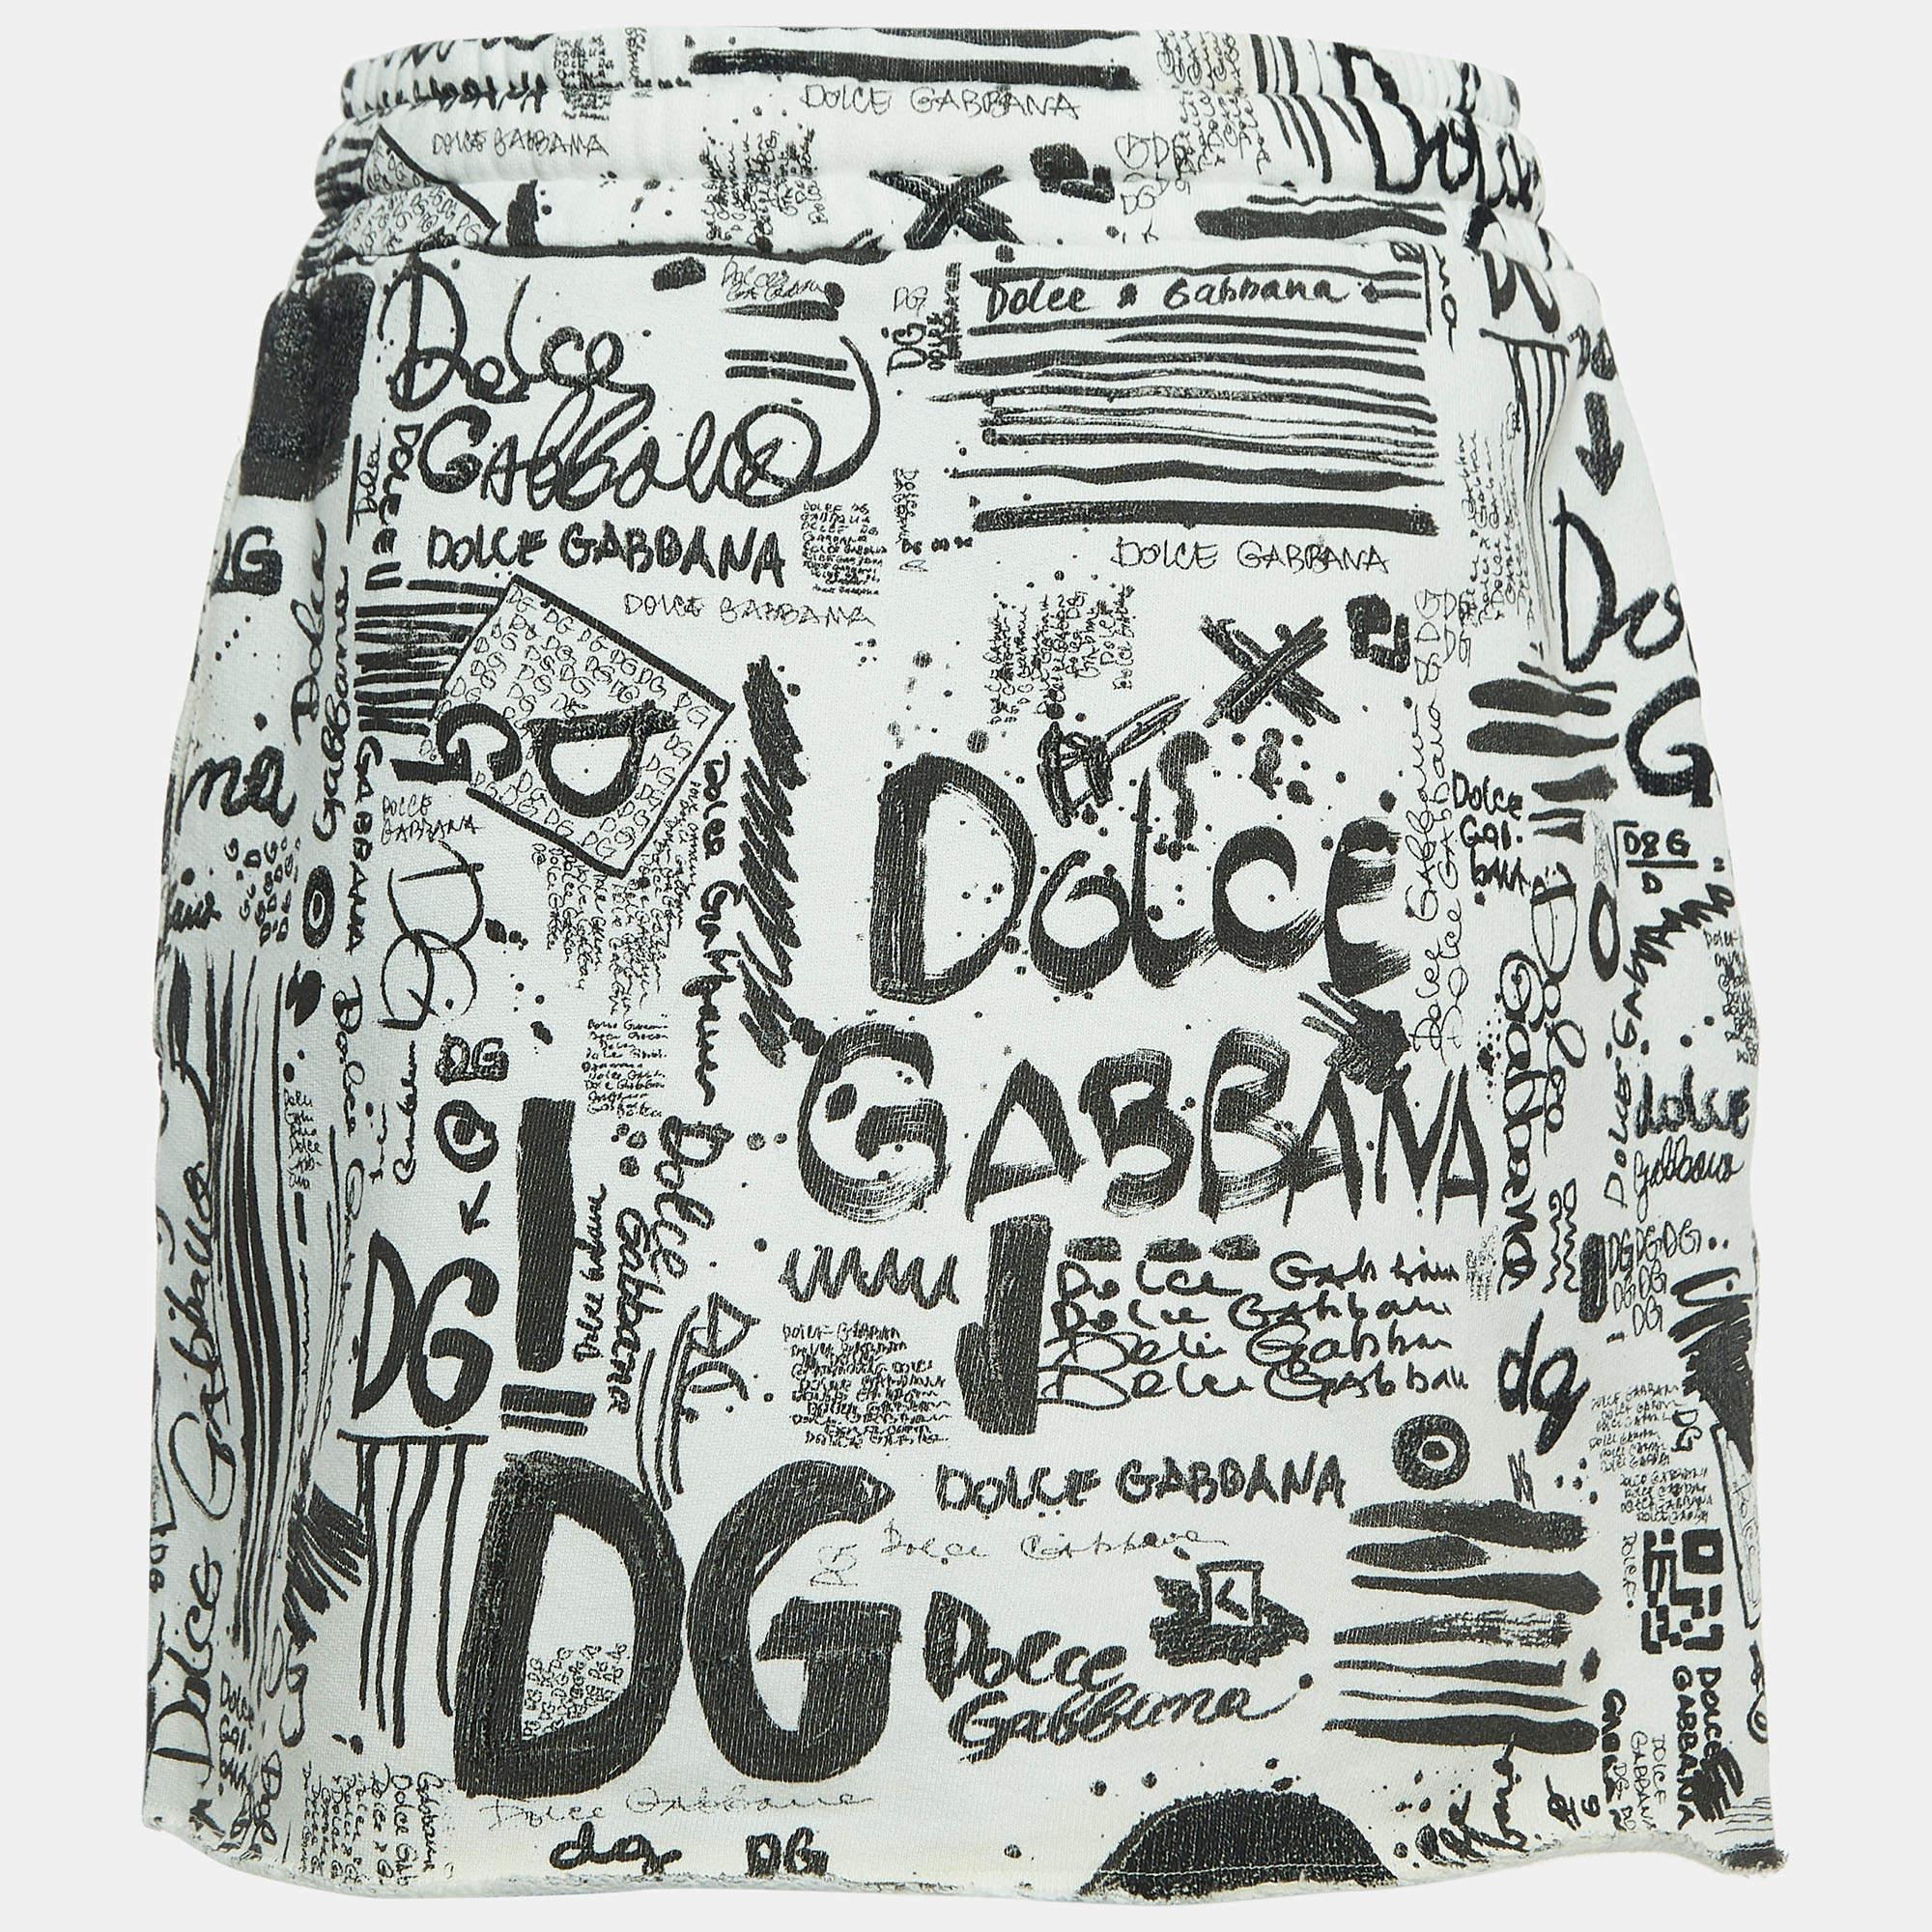 Make a fashionable edit with this Dolce & Gabbana skirt. It is made of a cotton blend and the simple silhouette is covered in graffiti prints.

